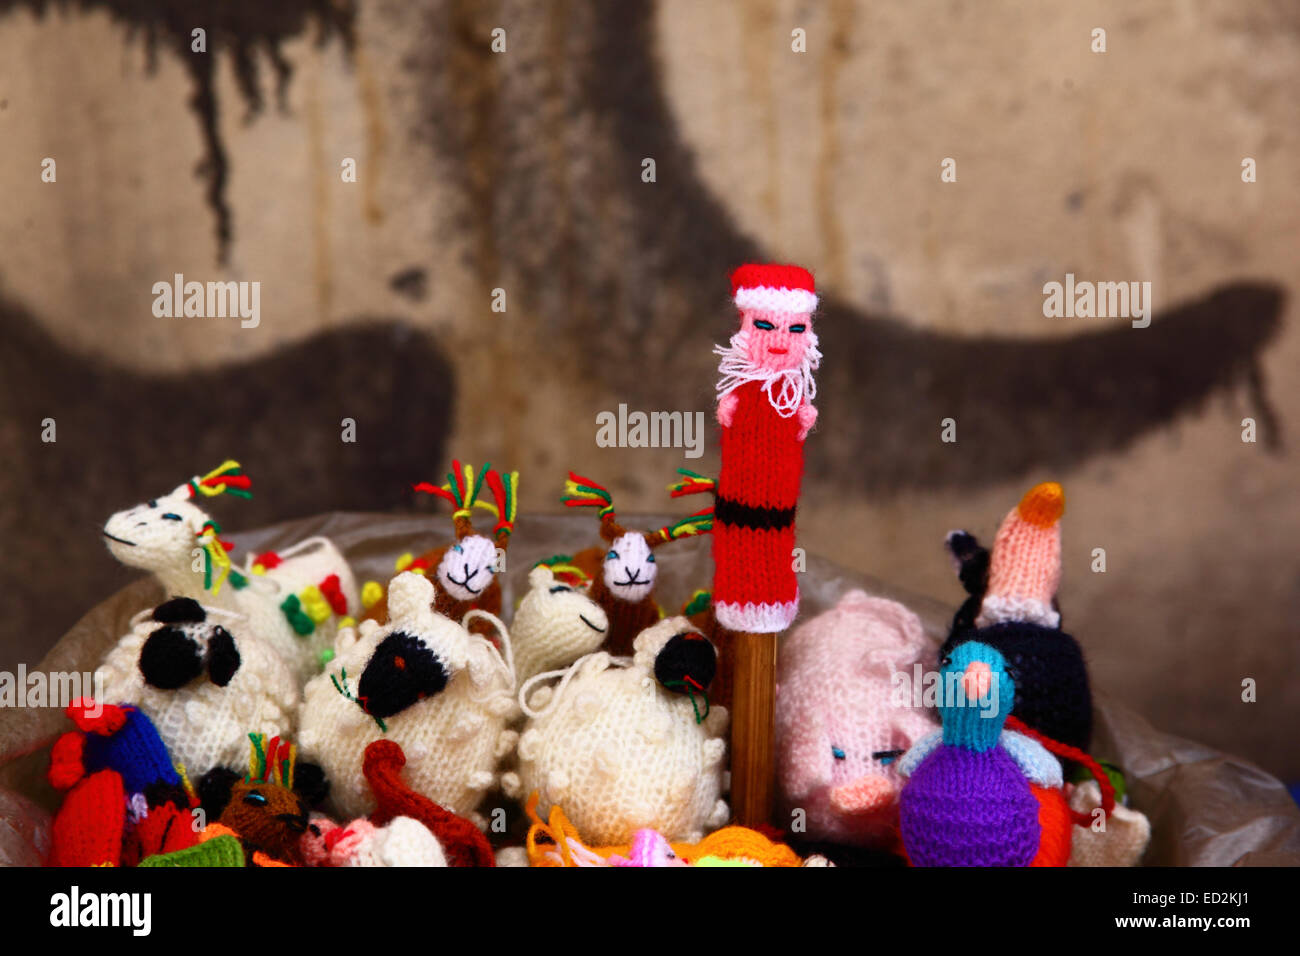 La Paz, Bolivia, 24th December 2014. Woolen Father Christmas, llama and sheep finger puppets for sale on a street stall in the tourist market area. Credit:  James Brunker / Alamy Live News Stock Photo